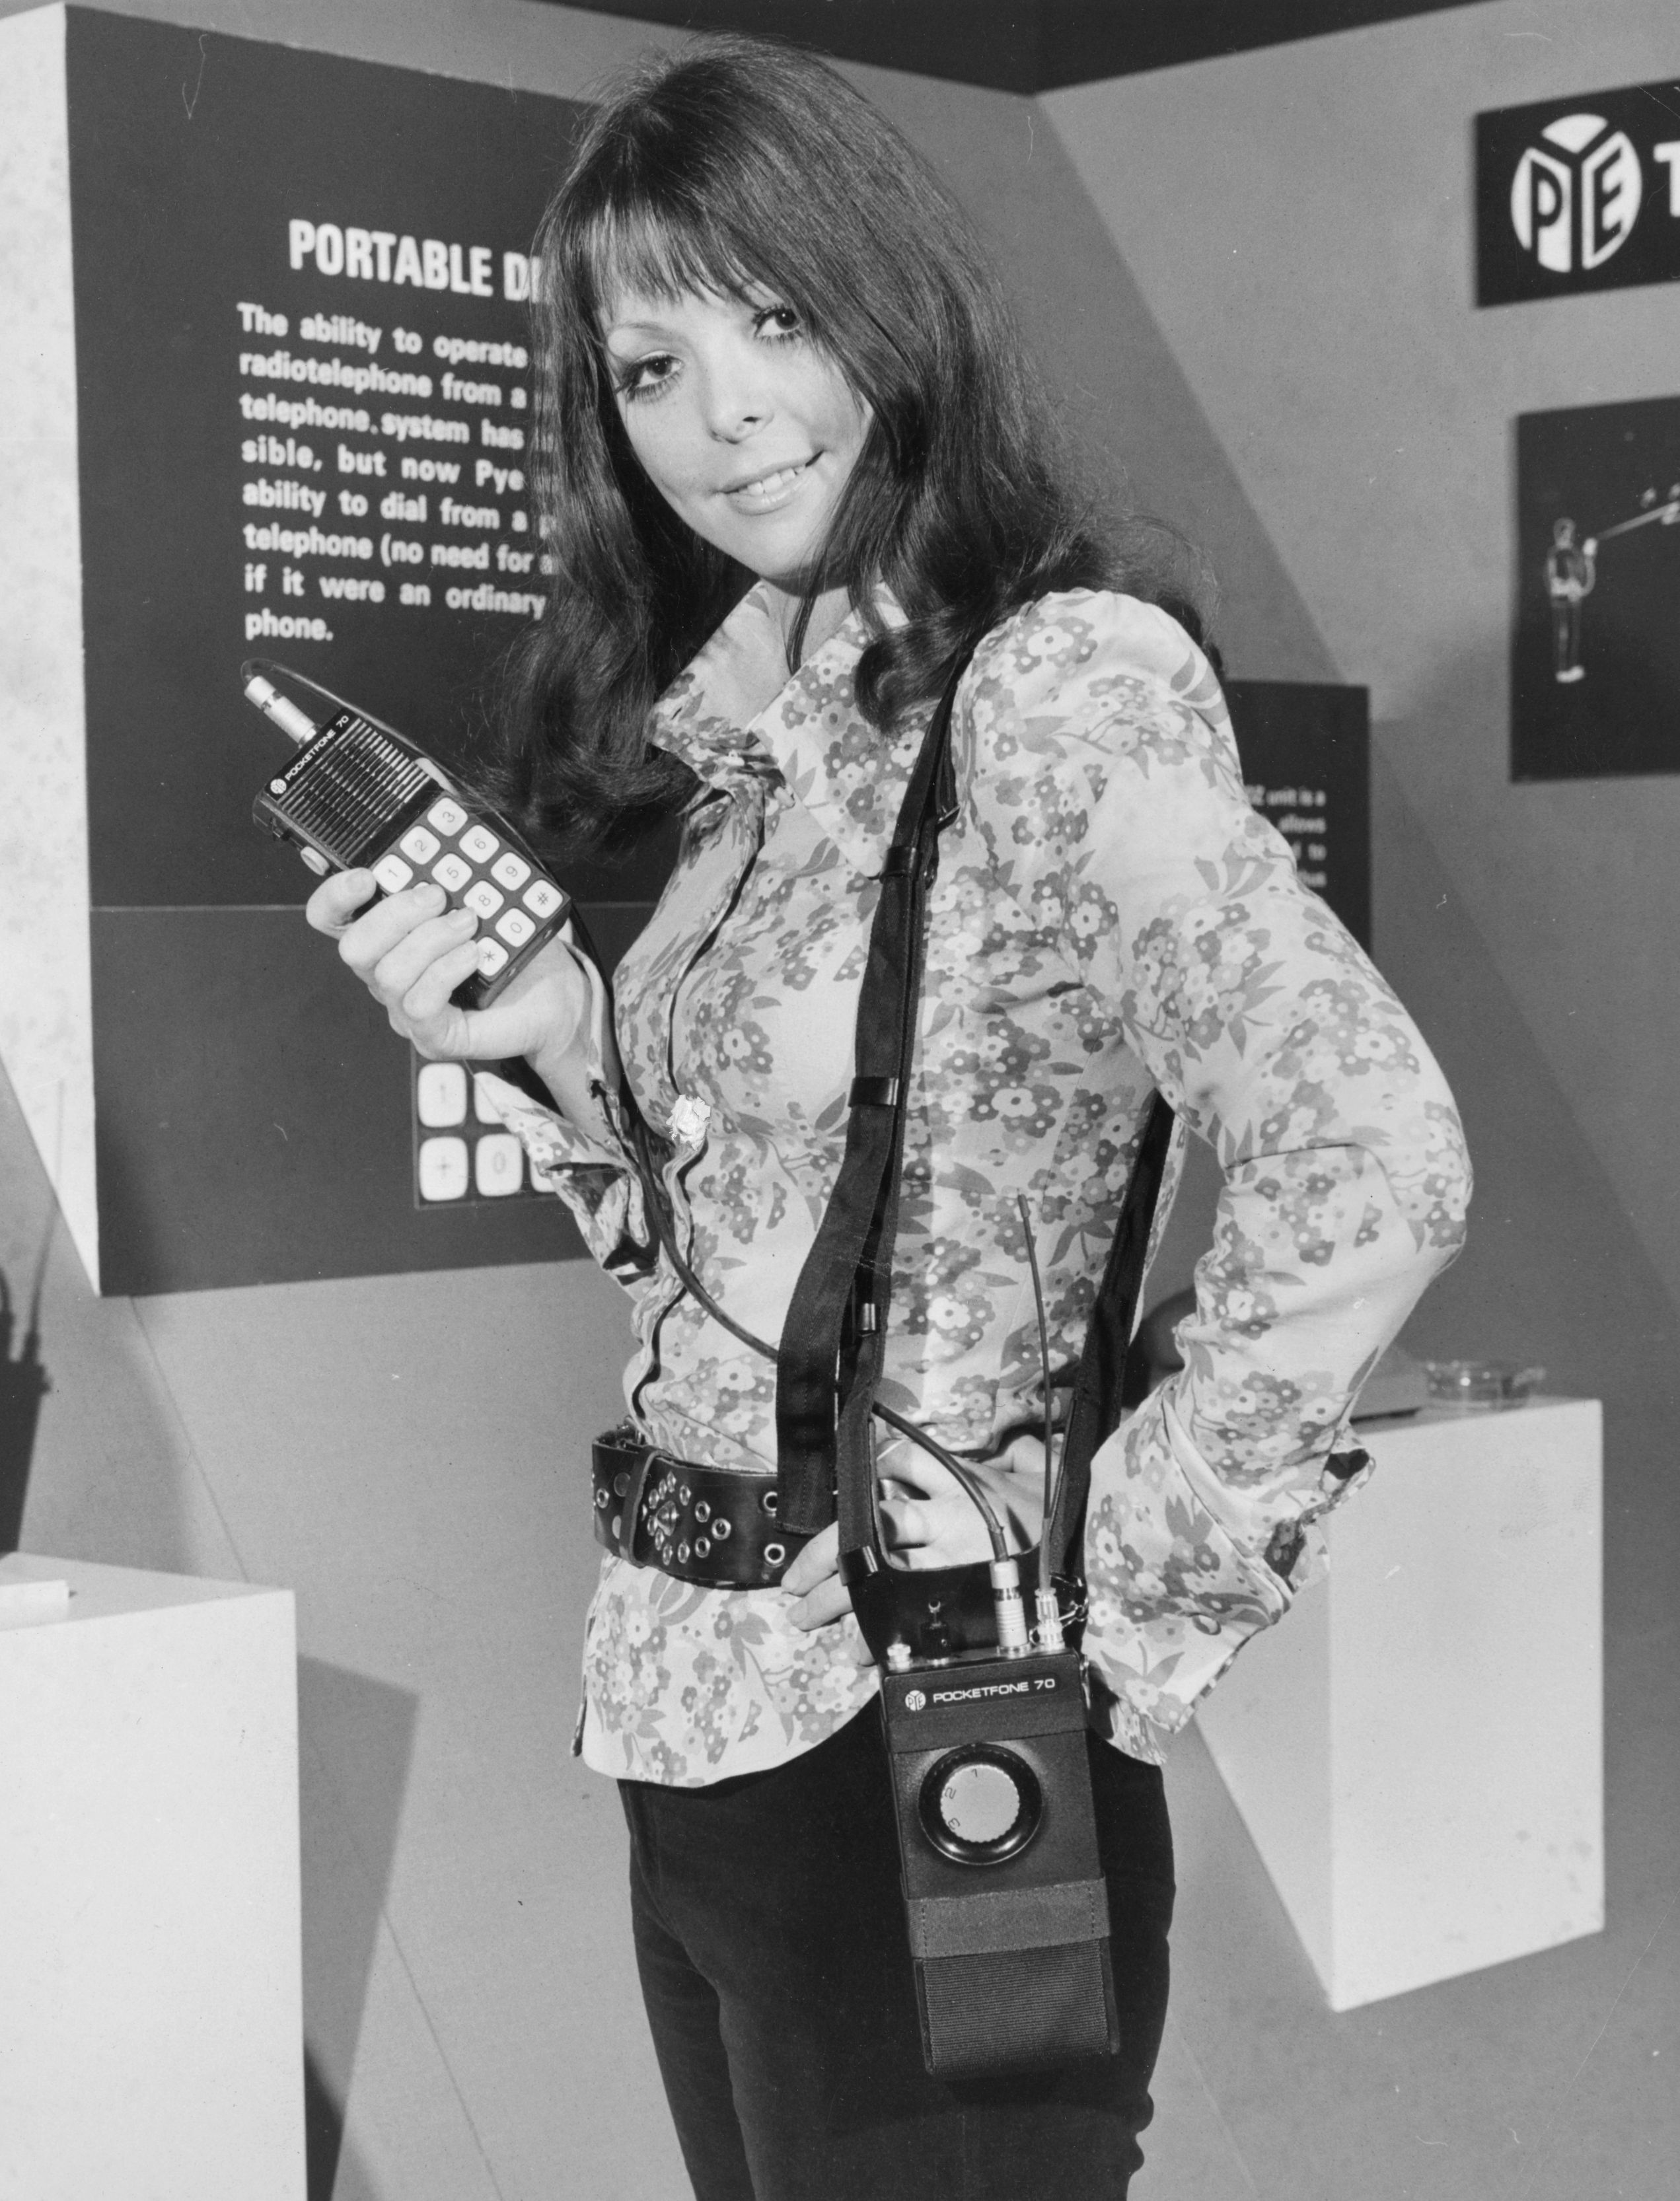 a PYE portable radiotelephone at the Communications Today, Tomorrow and the Future exhibition in London. England, 1972.jpg